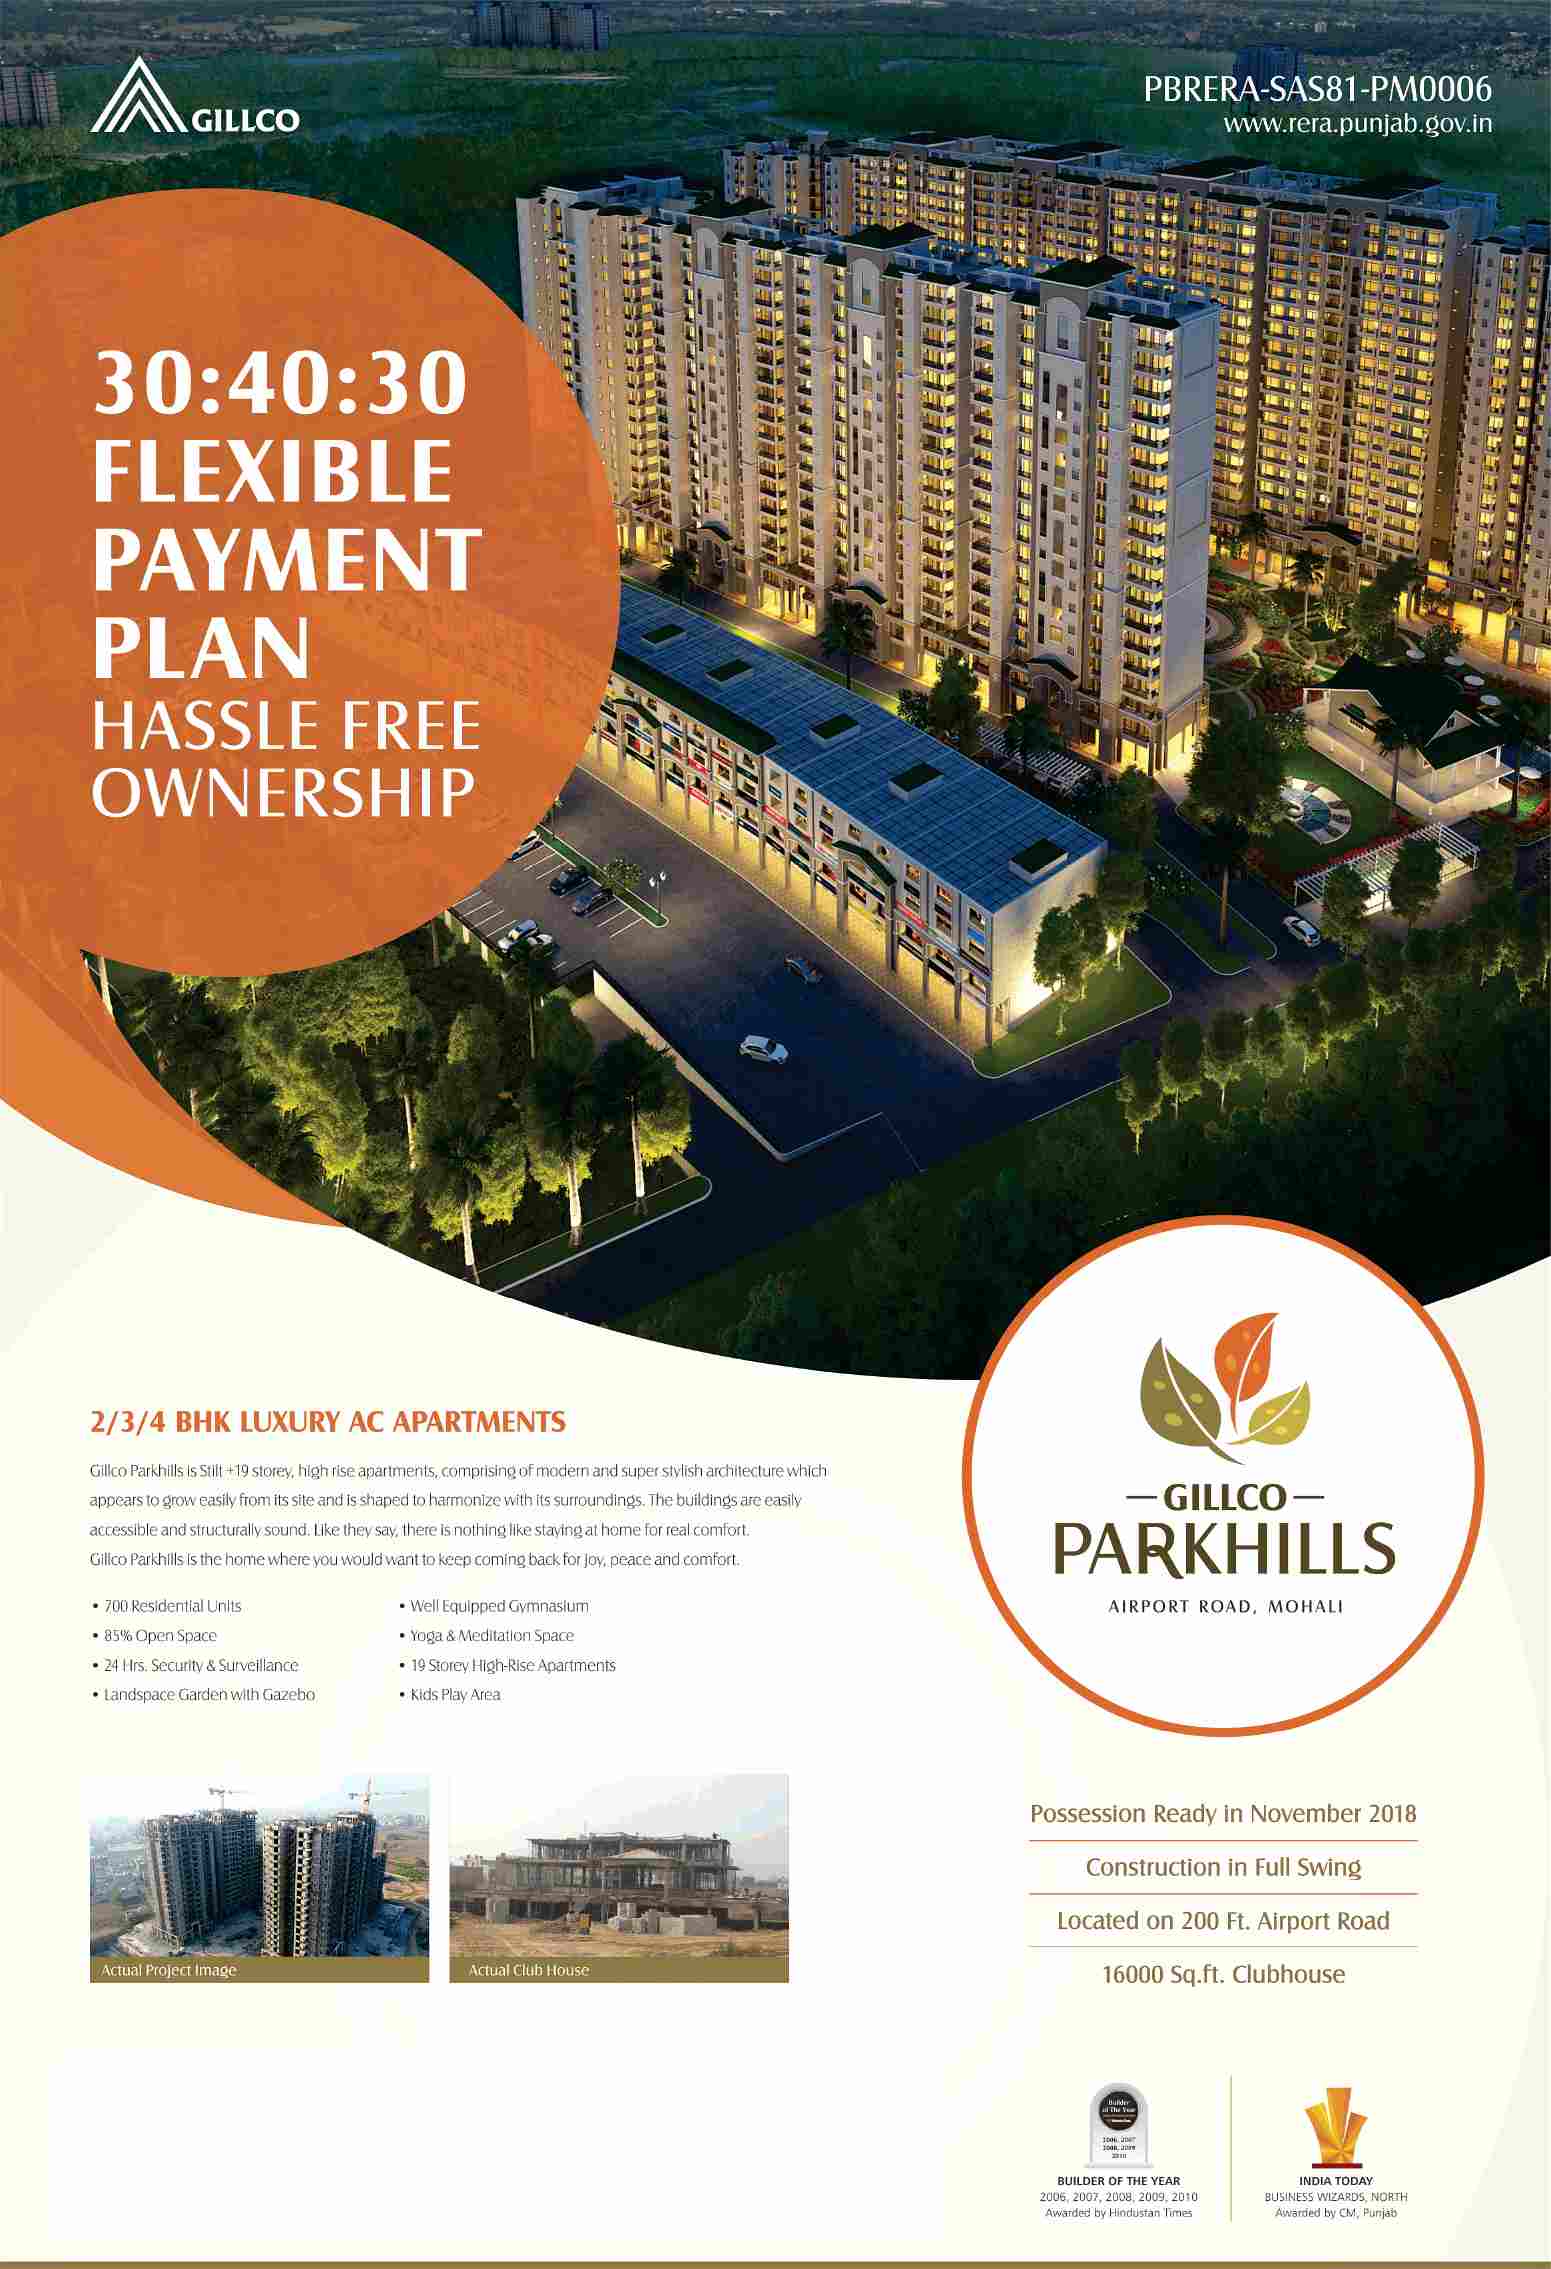 There is nothing like staying at Gillco Parkhills for real comfort in Mohali Update